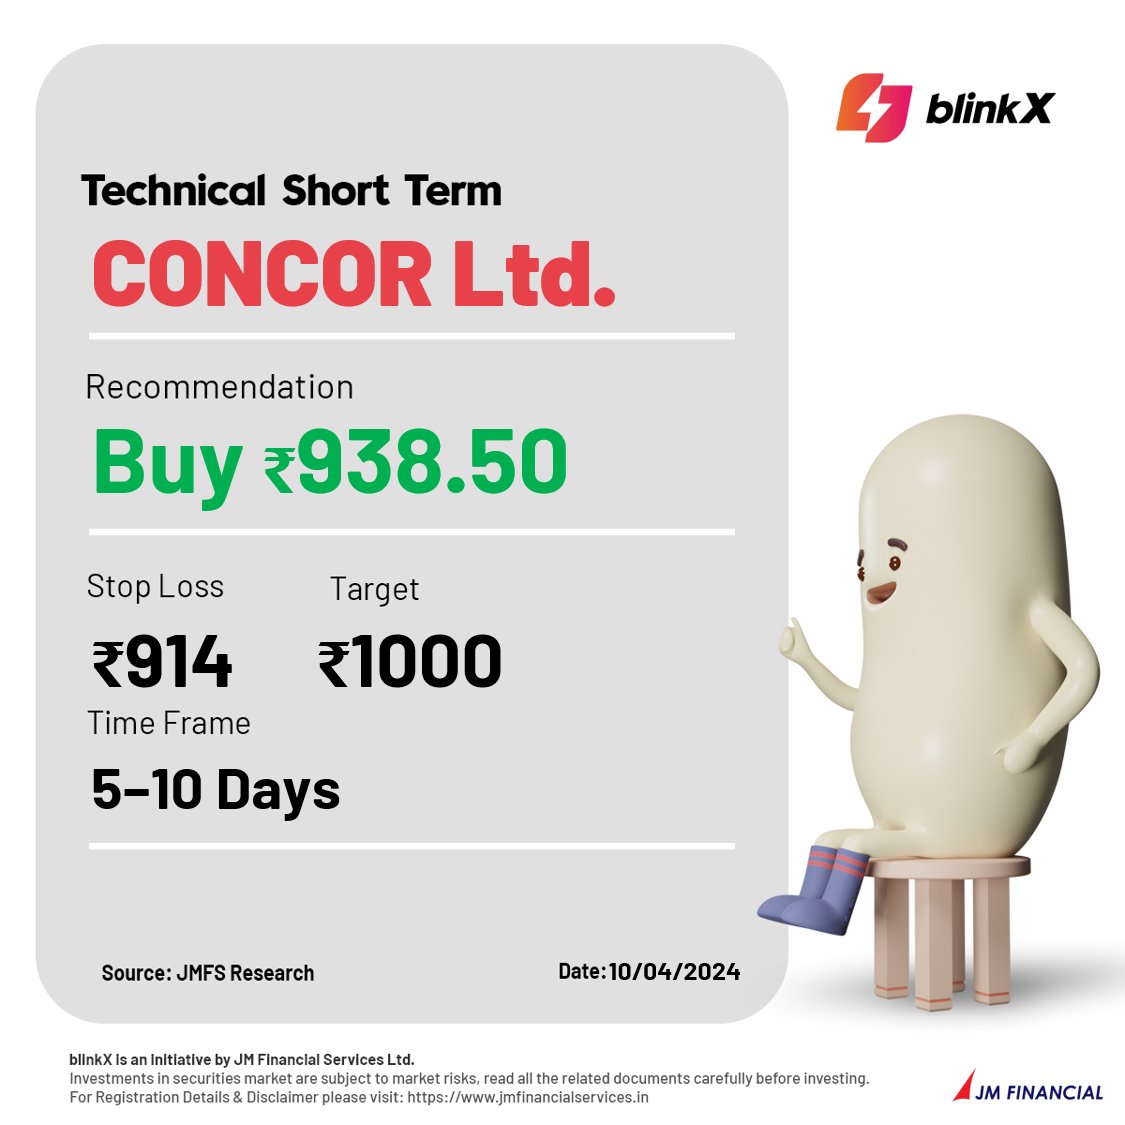 Technical Short Term

BUY – Container Corporation of India Ltd.

Get the app now: bit.ly/4cvU8YK

#concor #concord #containercorporation #PSU #transporter #transportationindustry #transportationservices #containers #containerstorage #nifty #banknifty #viralpost #nse #bse